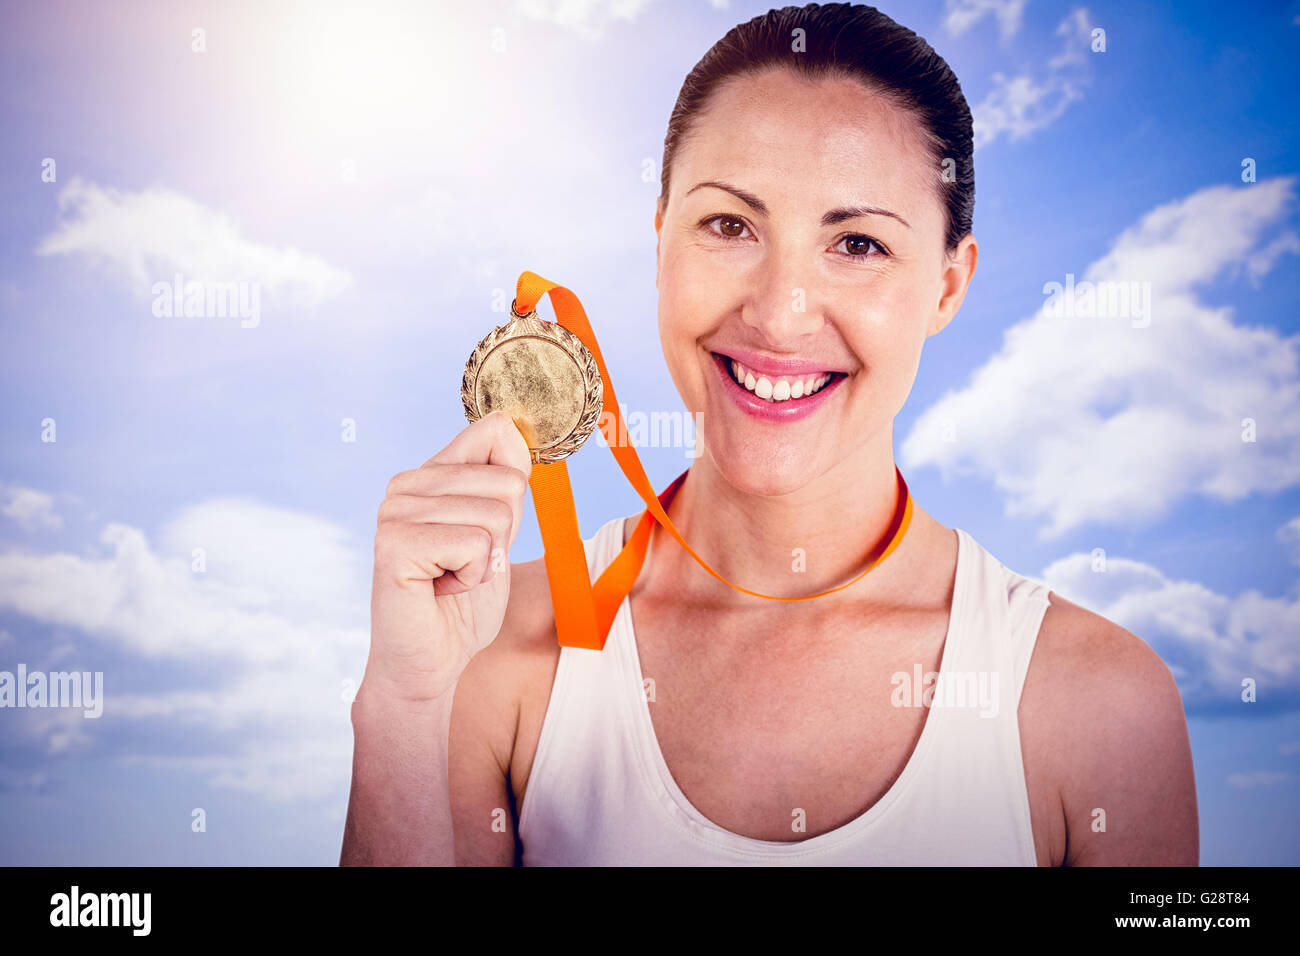 Composite image of female athlete posing with gold medals after victory Stock Photo